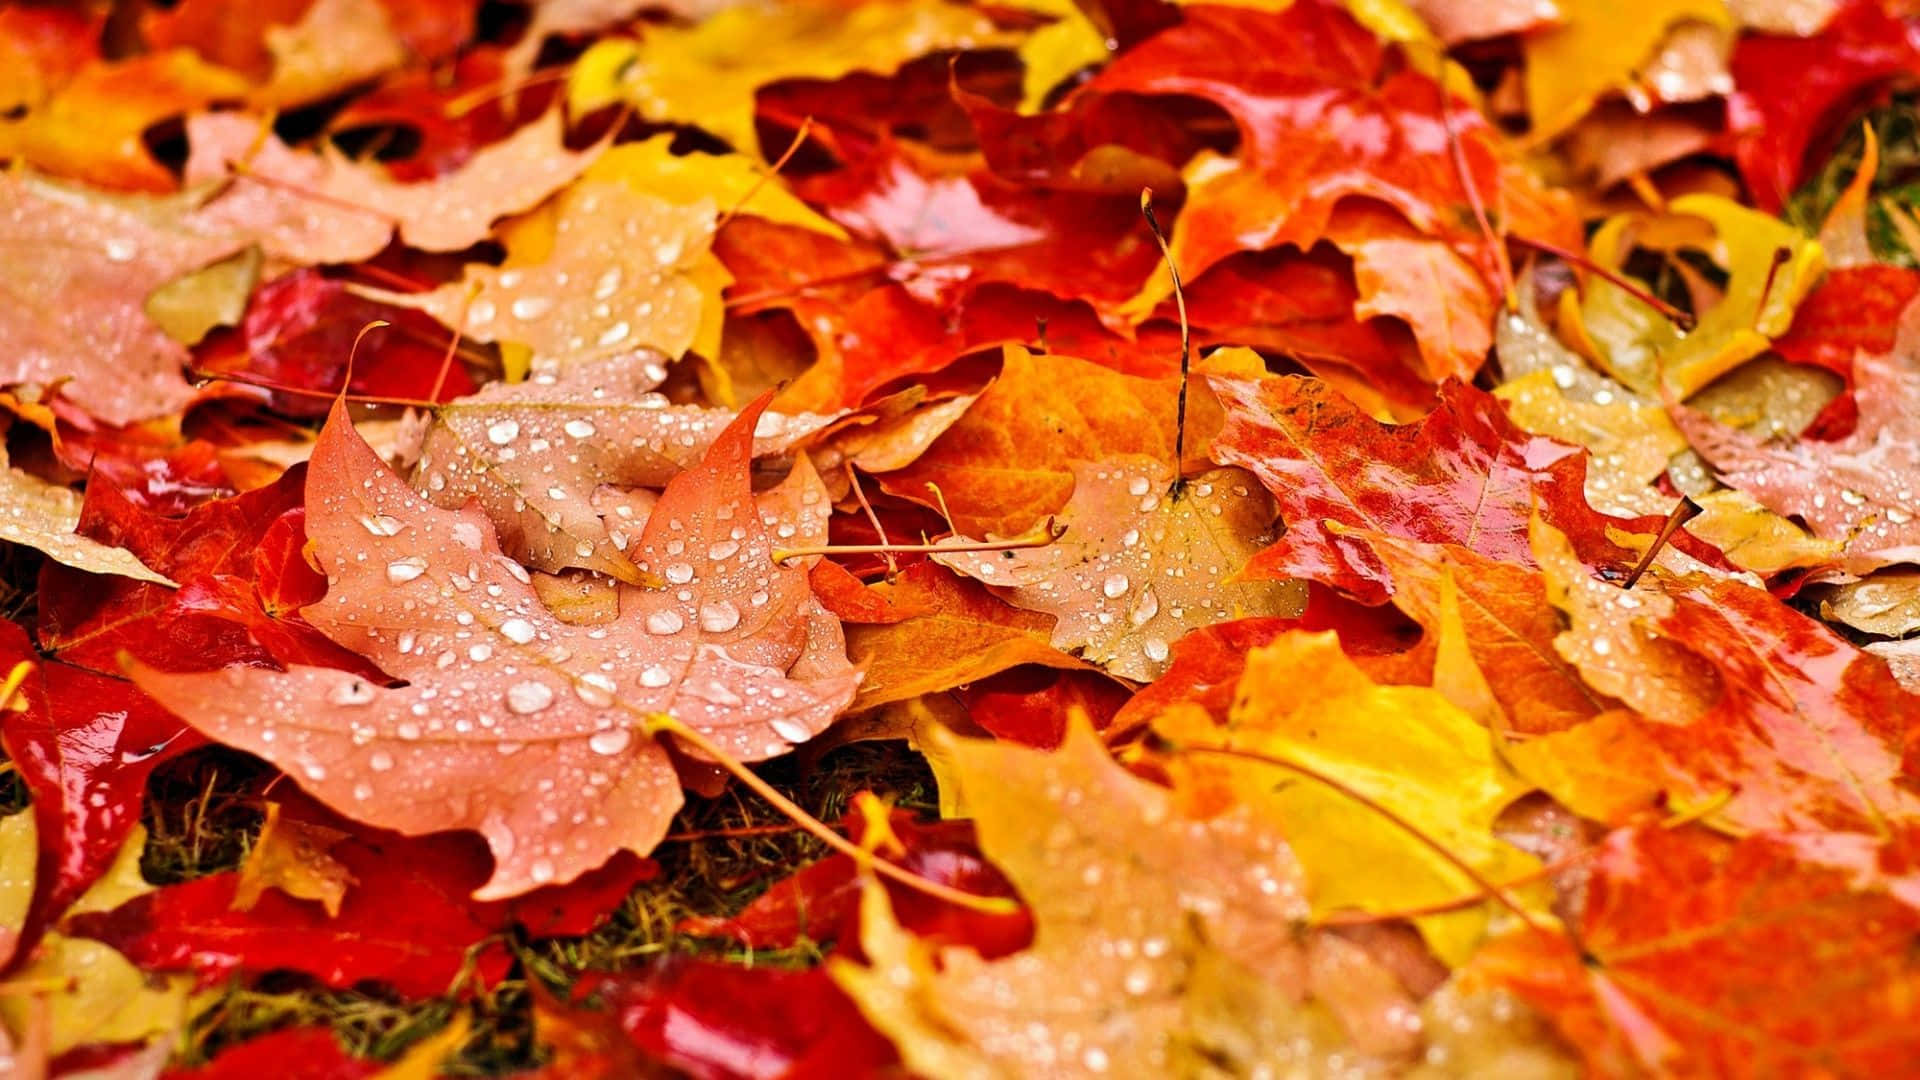 "Bring the warmth of autumn to your desktop."